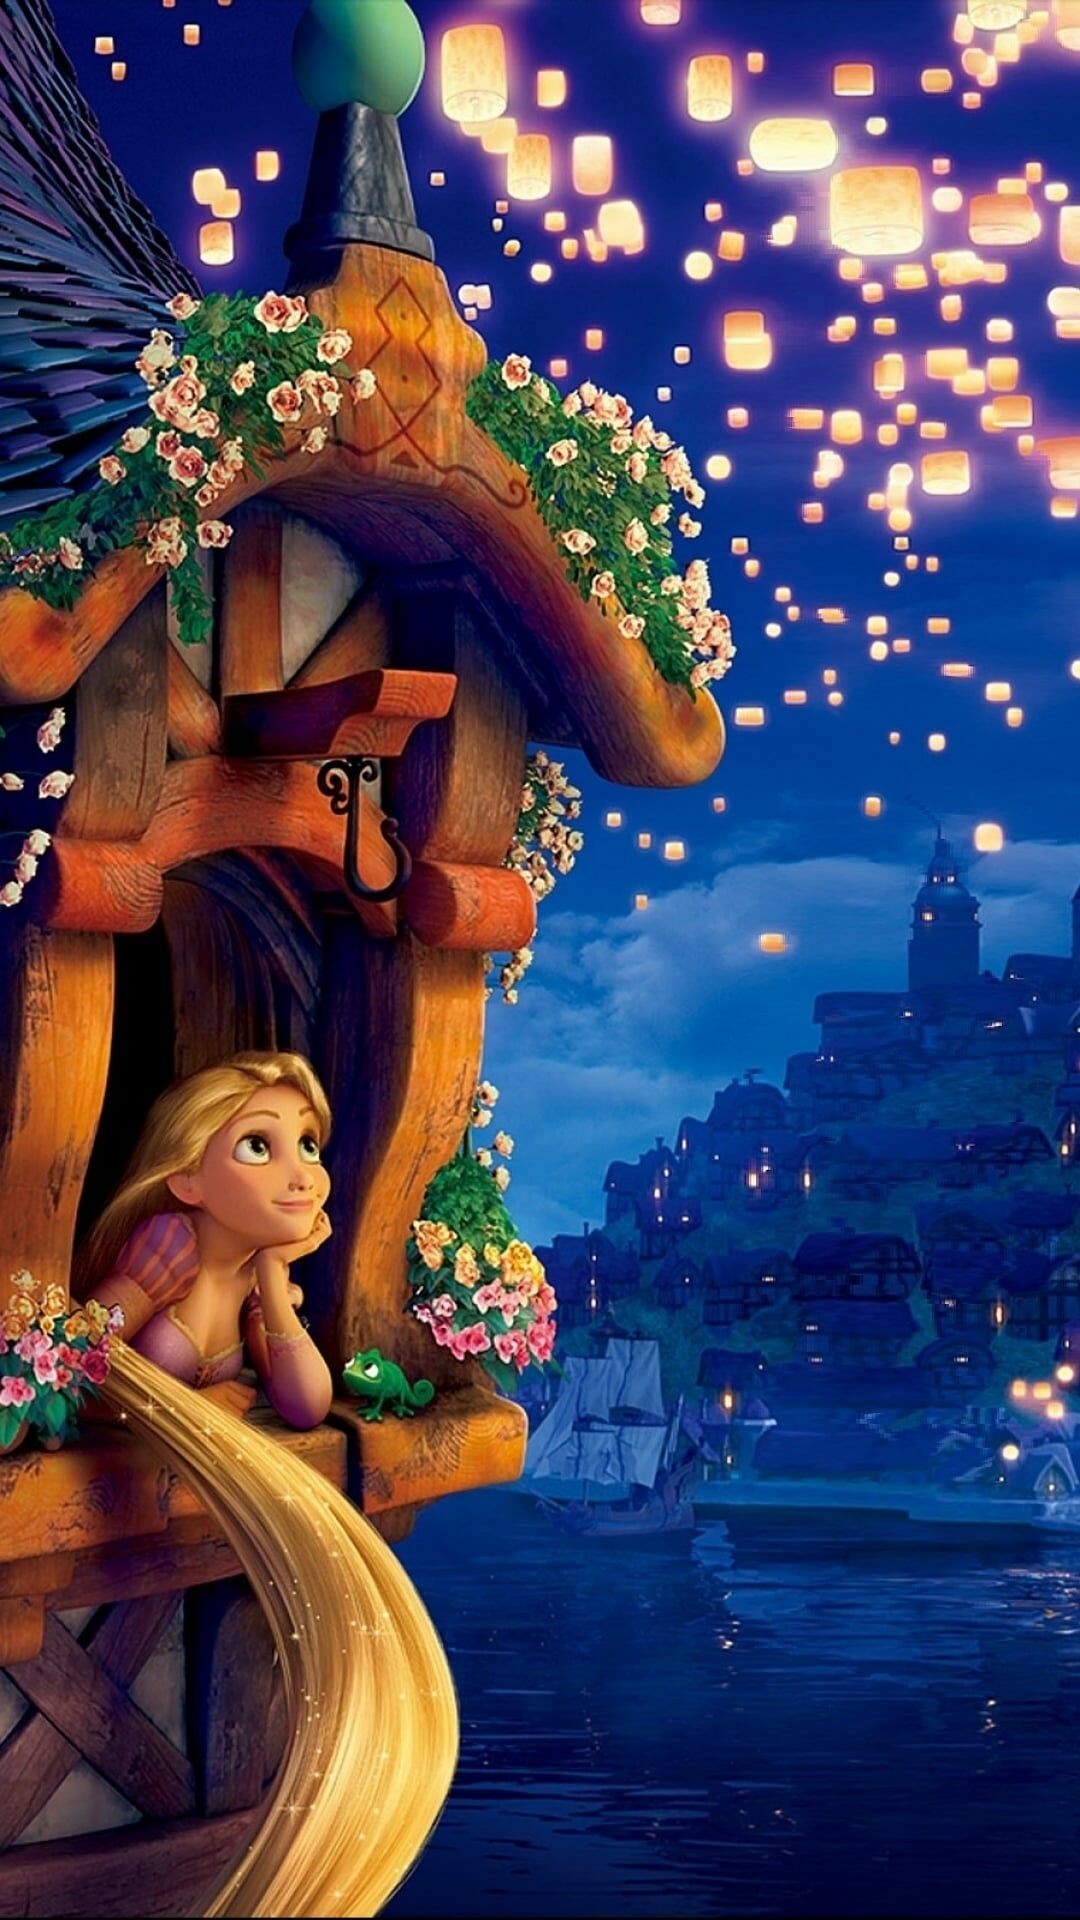 Tangled: The tenth Disney Princess, Rapunzel, Officially inducted into the line-up on October 2, 2011. 1080x1920 Full HD Background.